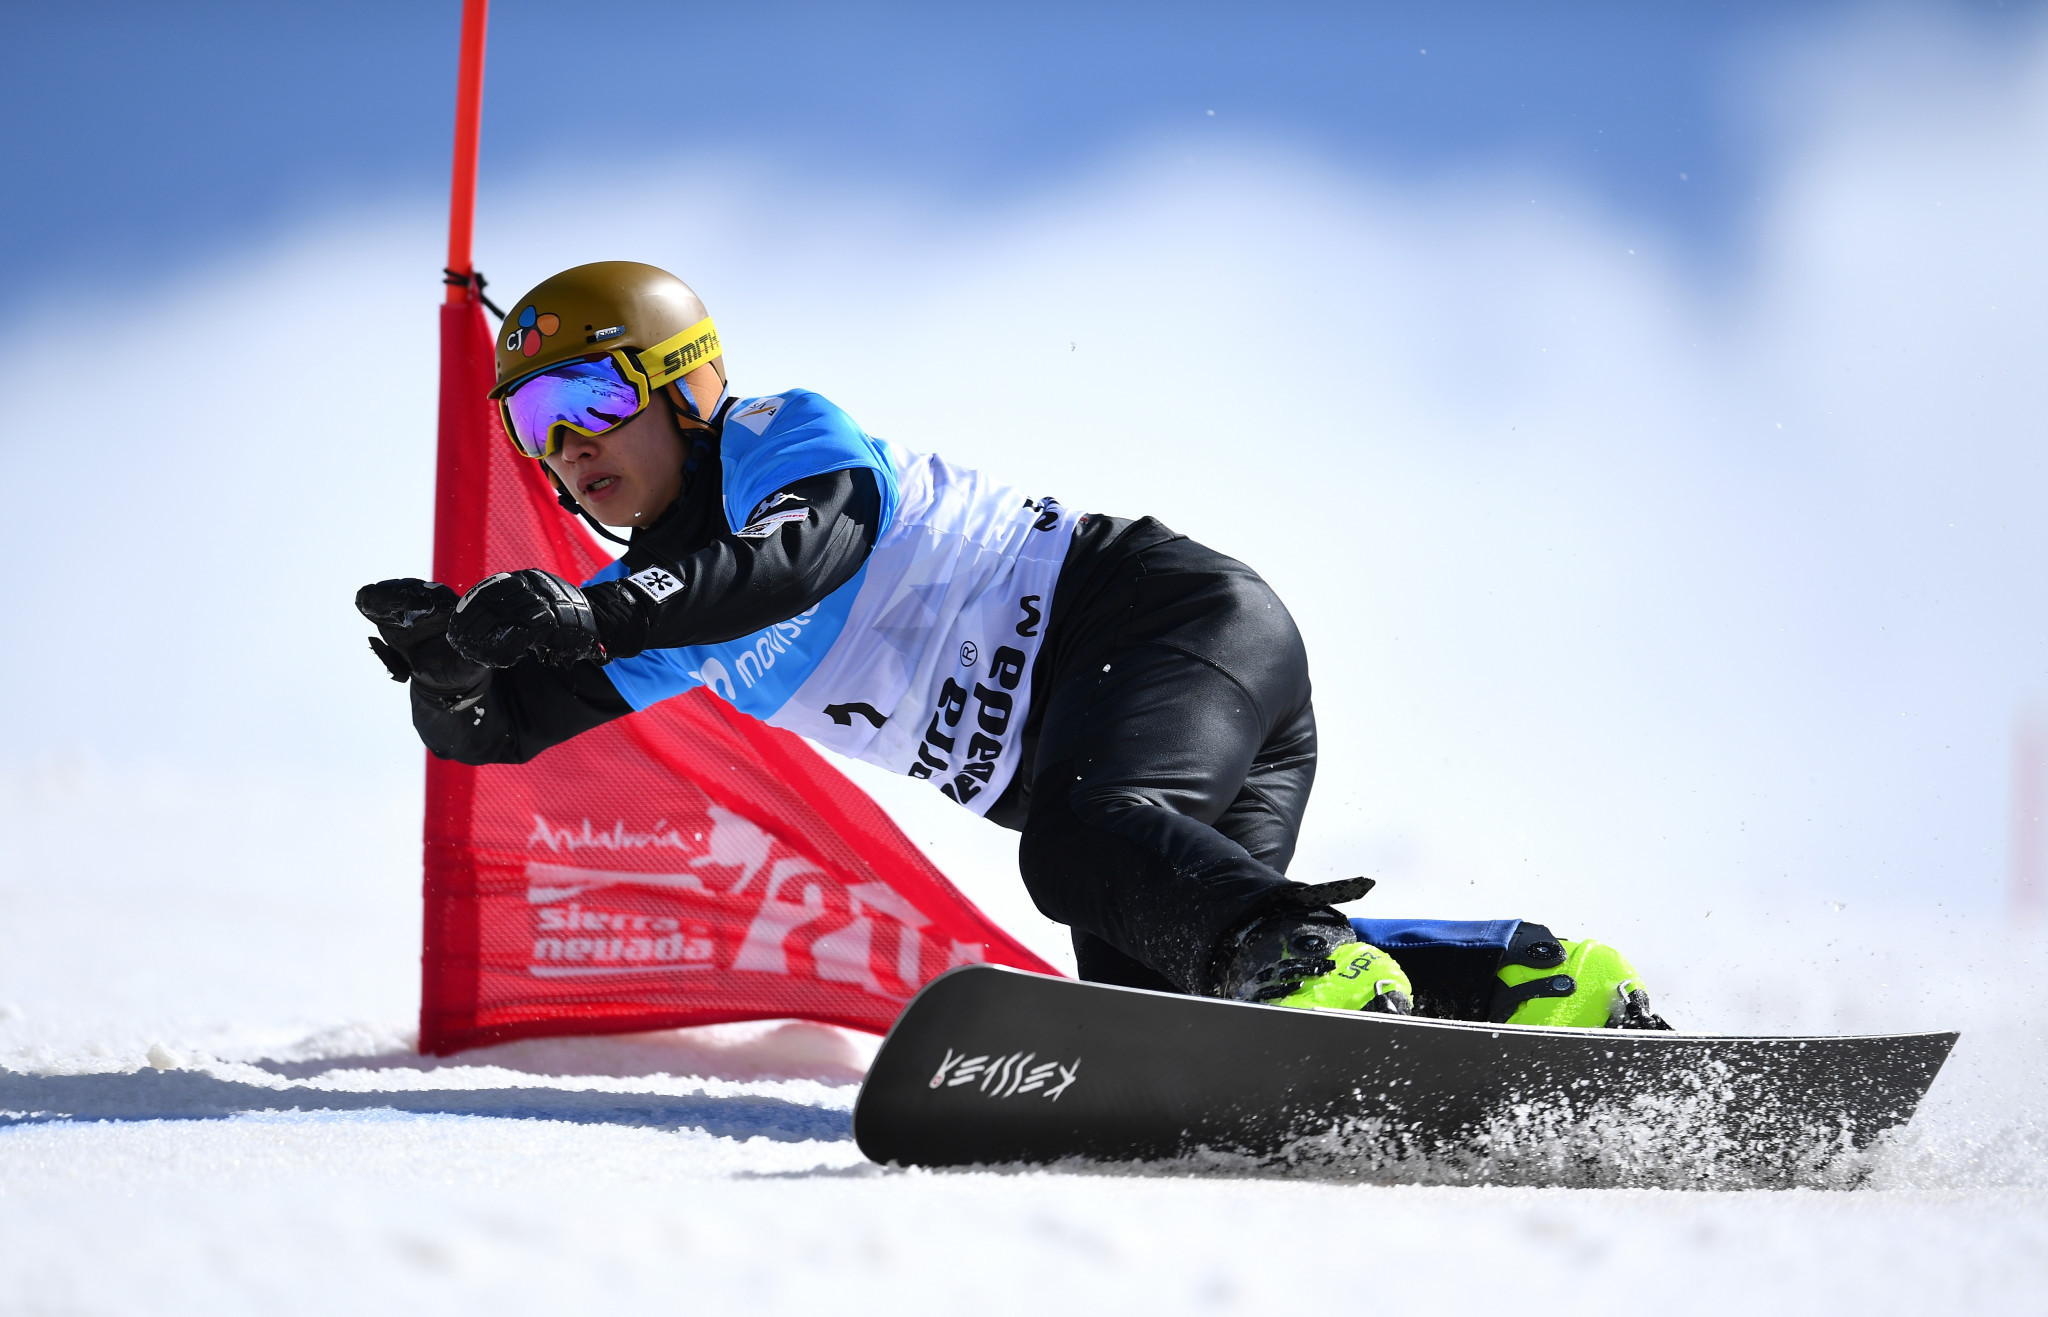 Lee Sang-ho was second in the only previous parallel slalom race of the season ©Getty Images